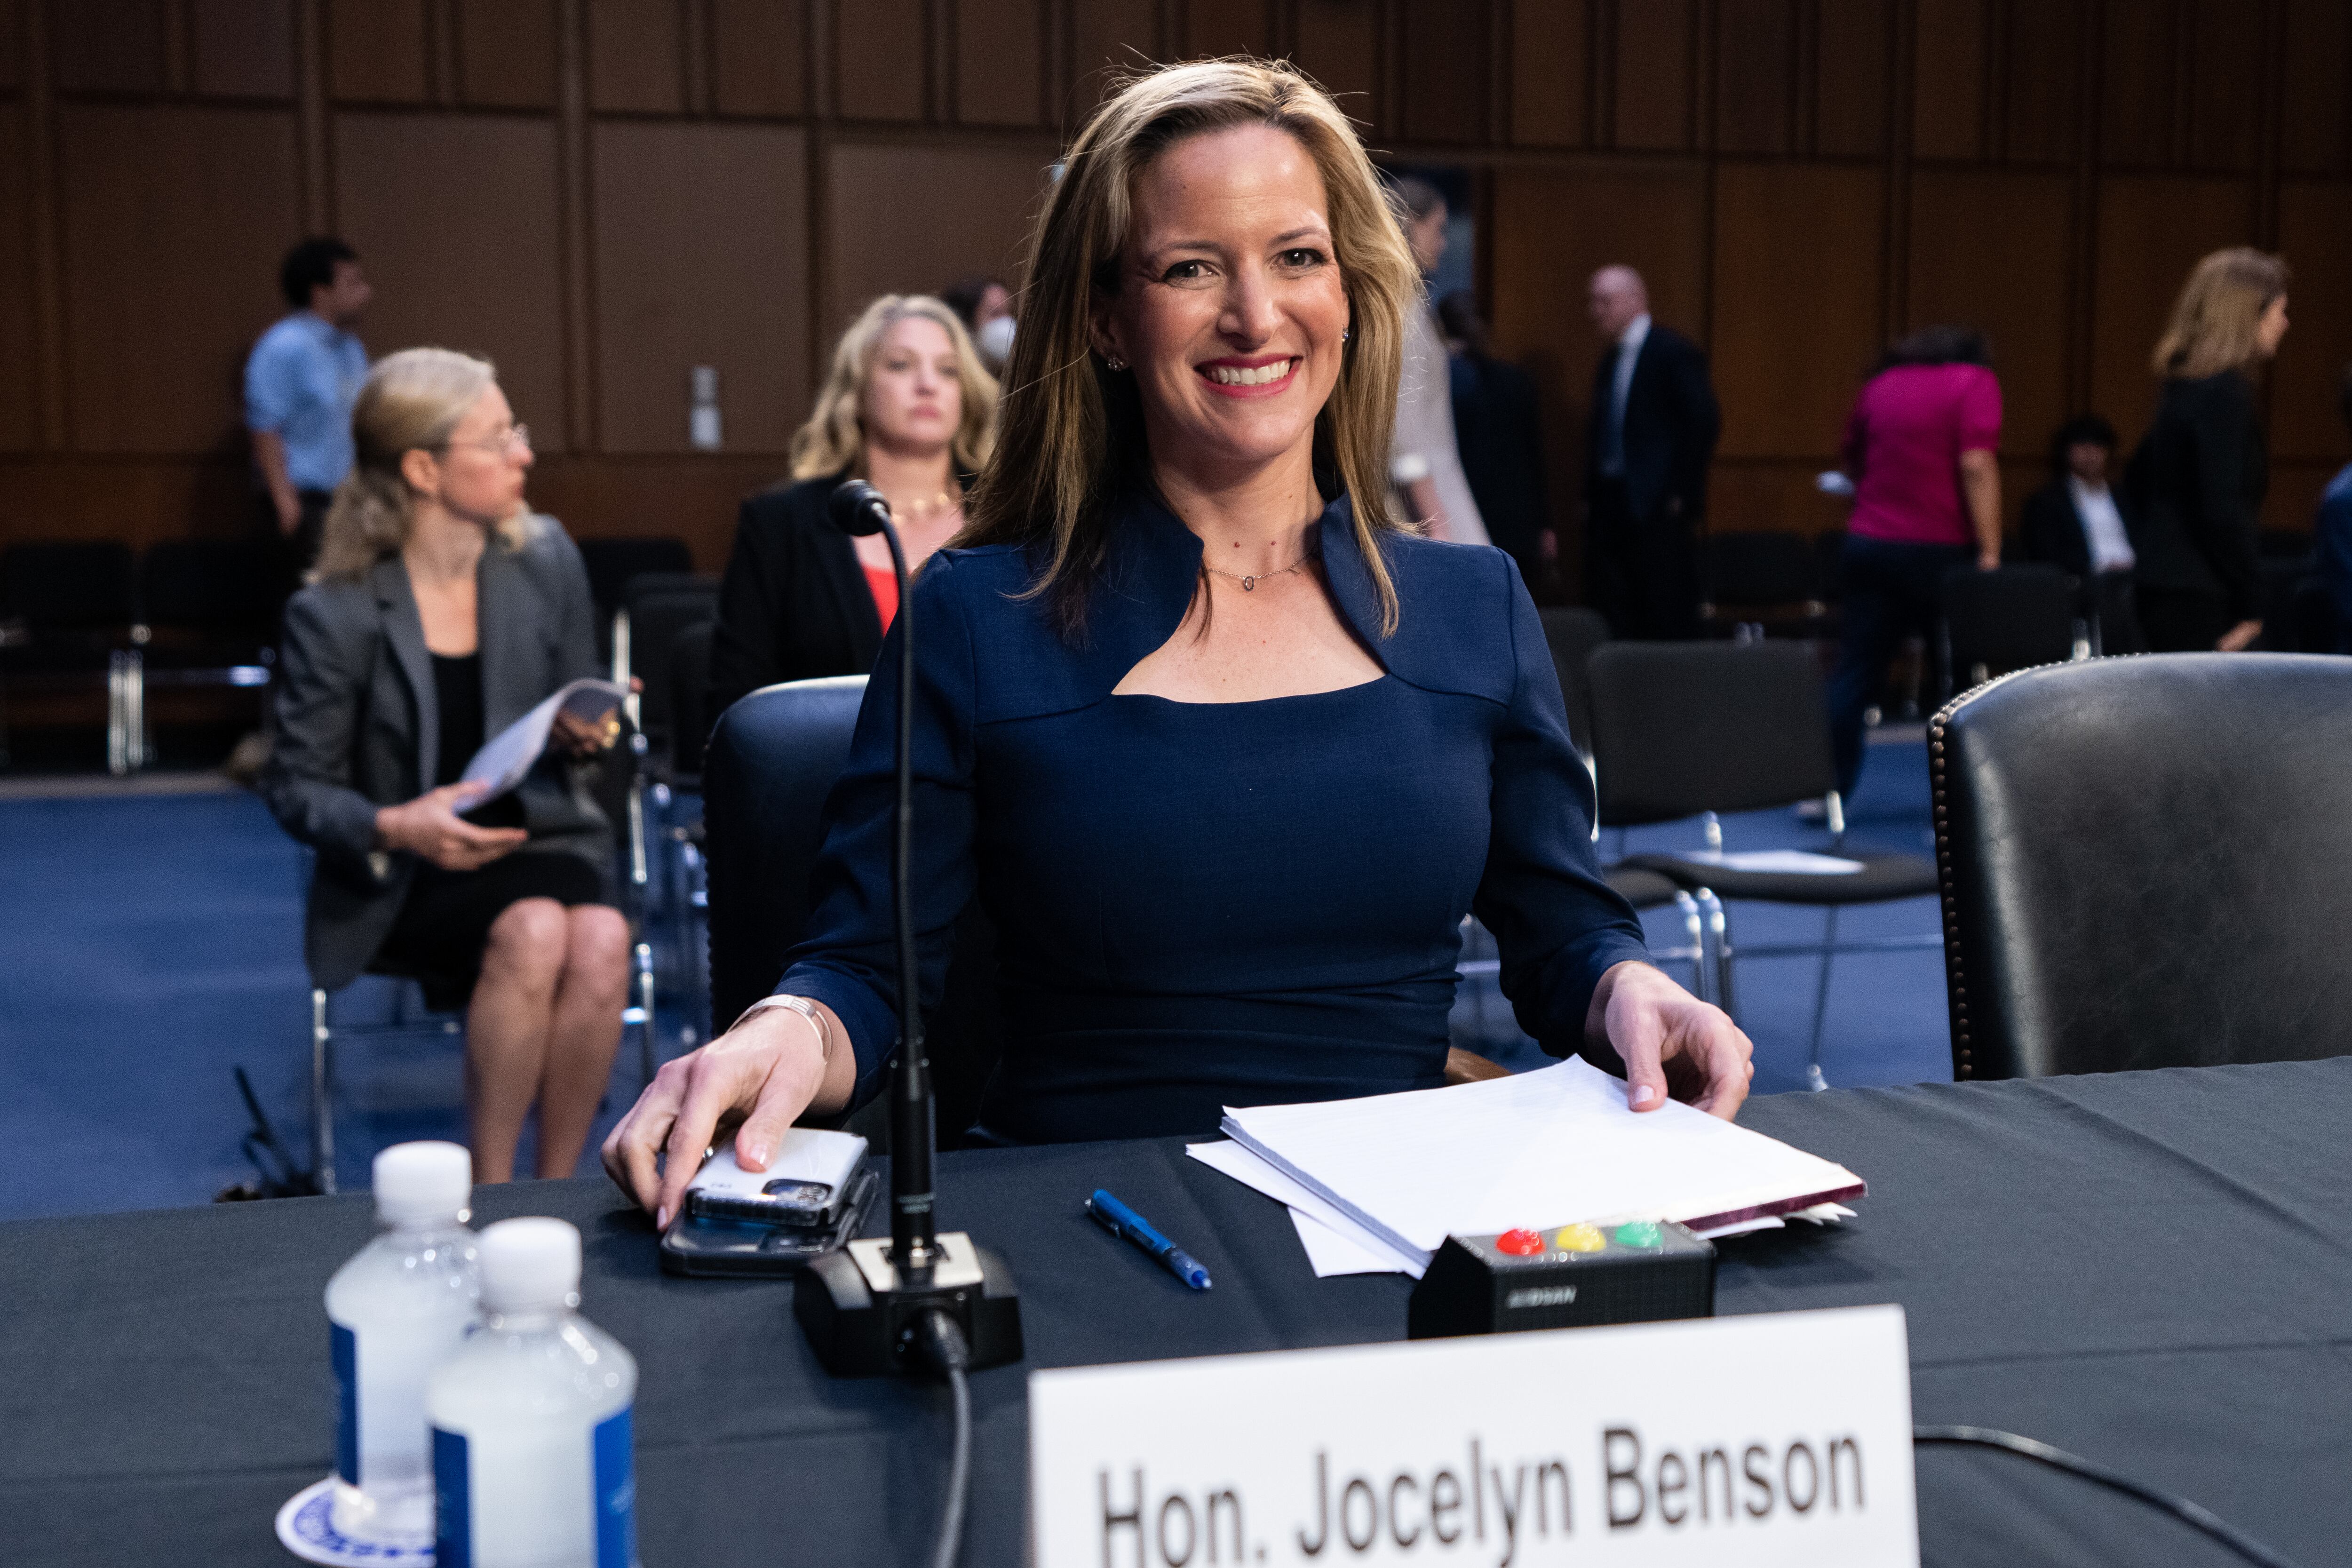 A woman seated at a table in a hearing room smiles. A placard reads “Hon. Jocelyn Benson.”